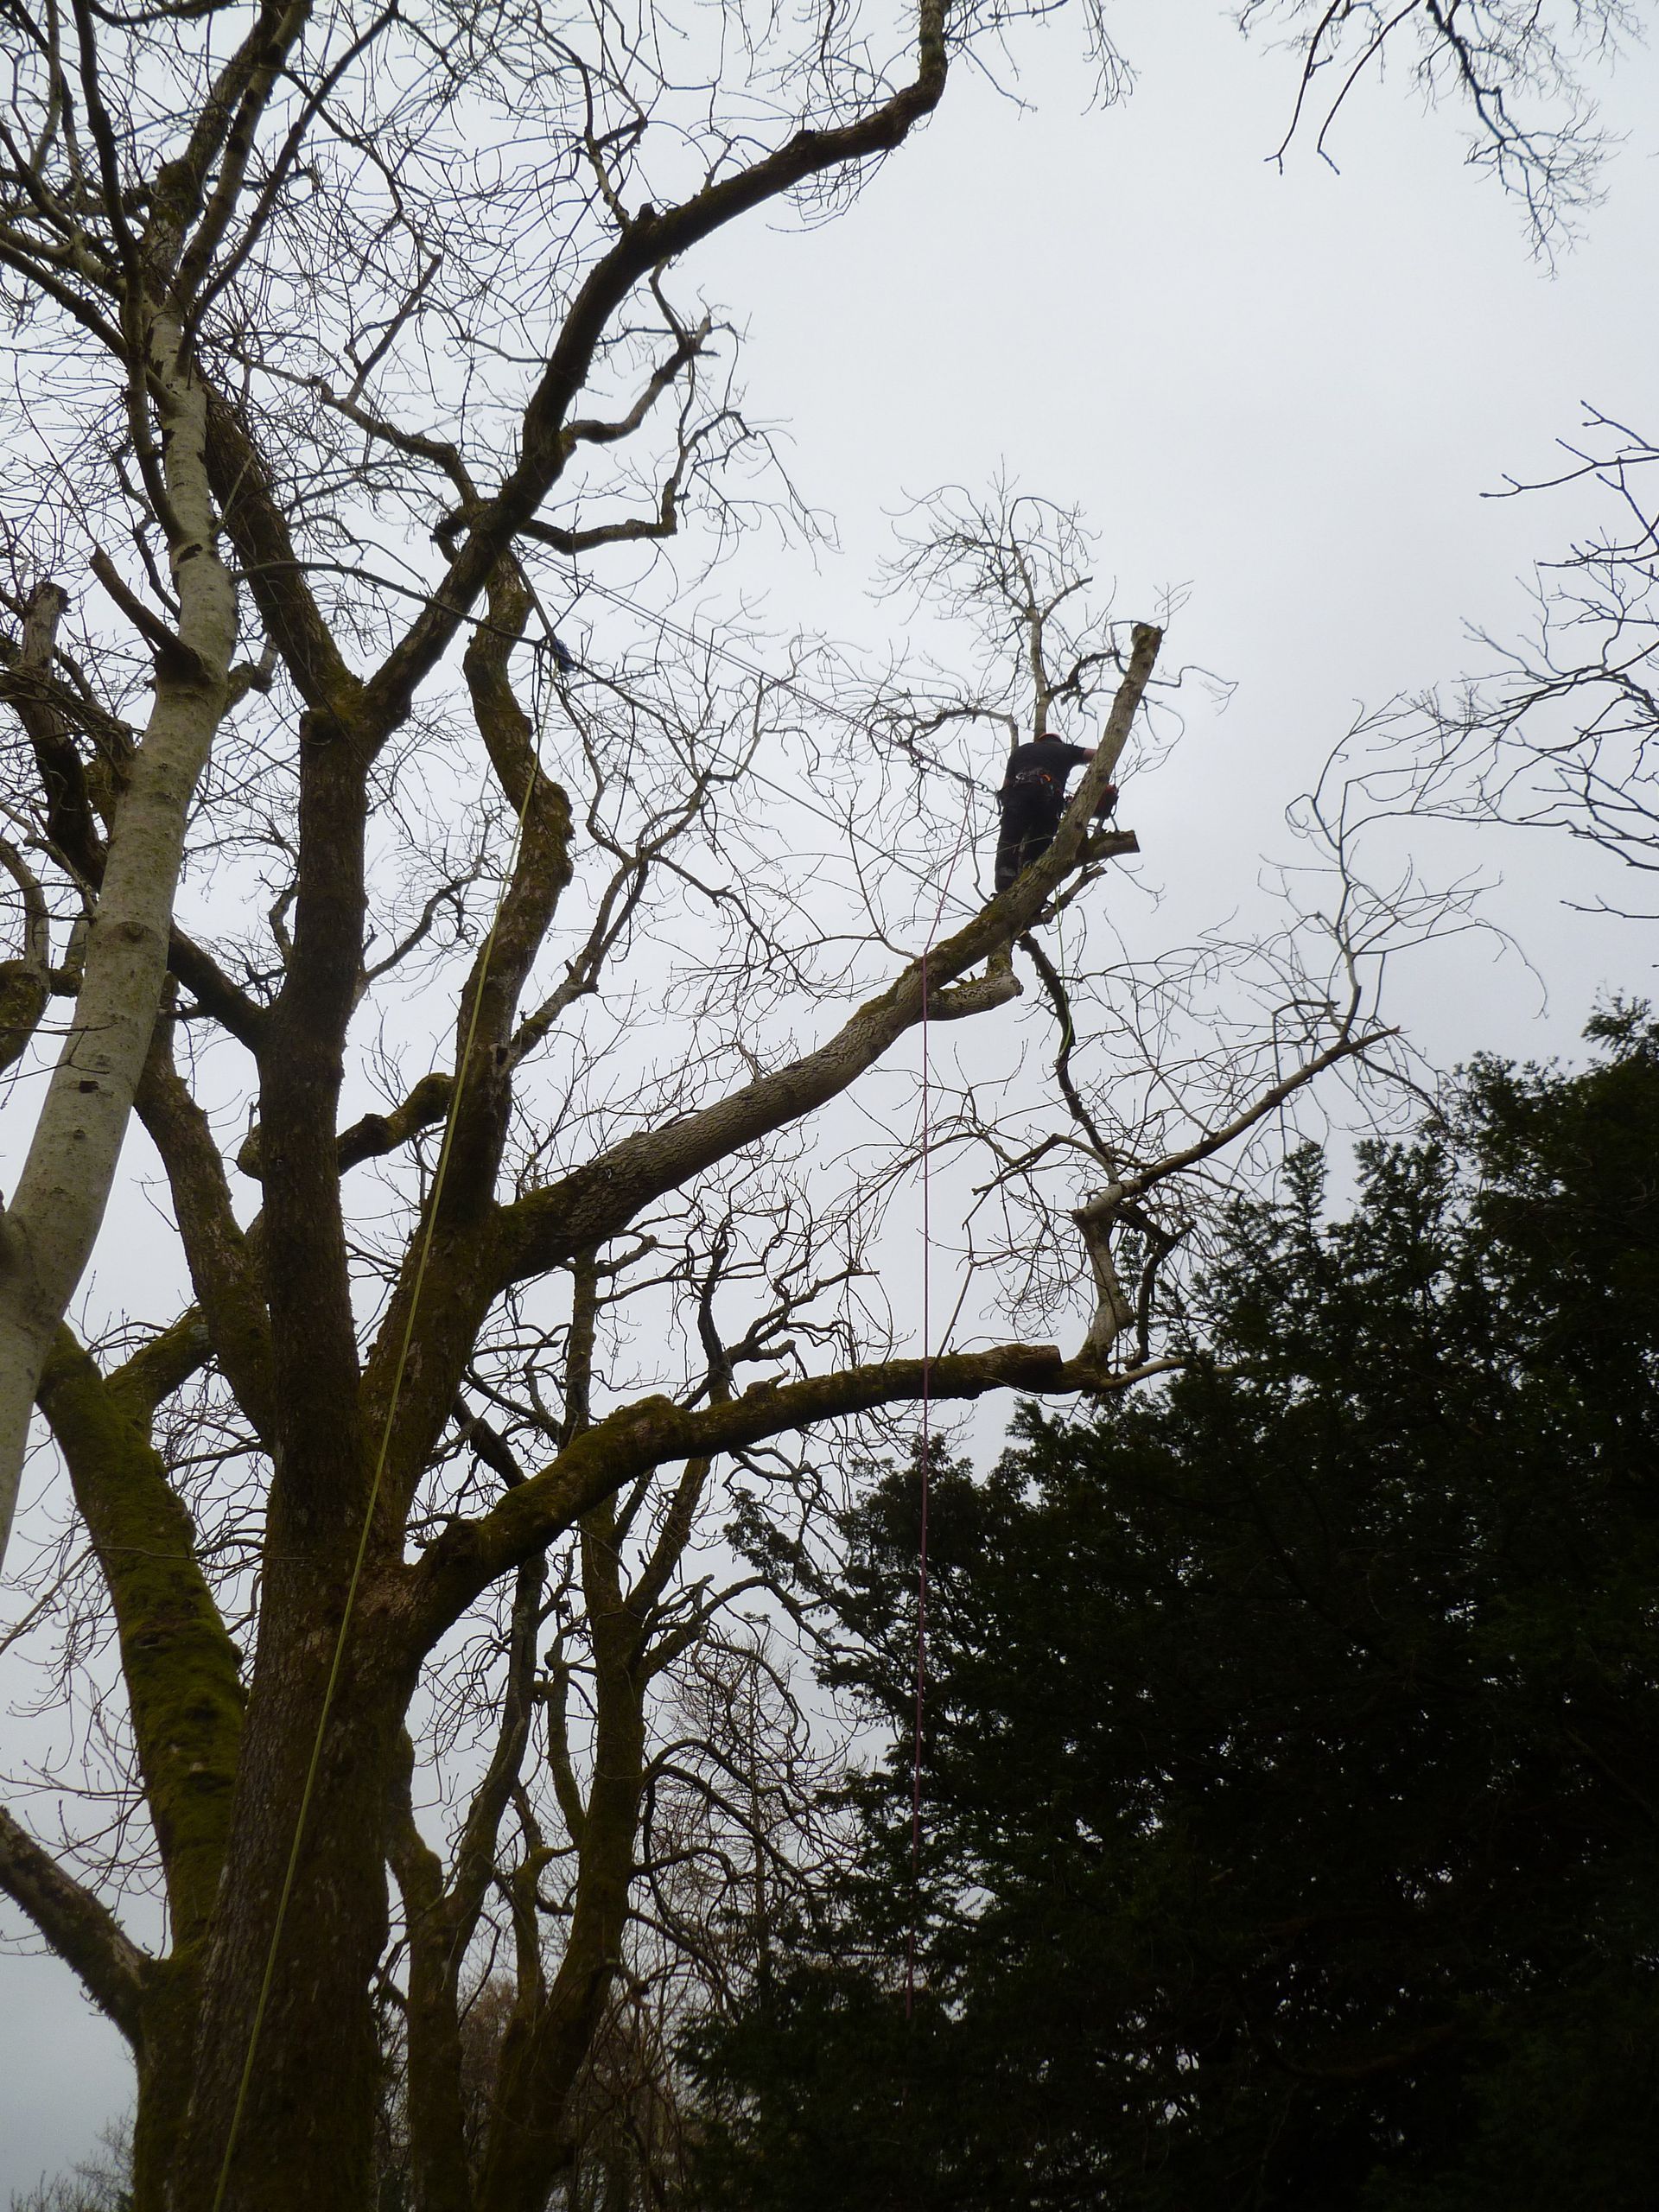 Removing a cavity filled Ash Tree branch.